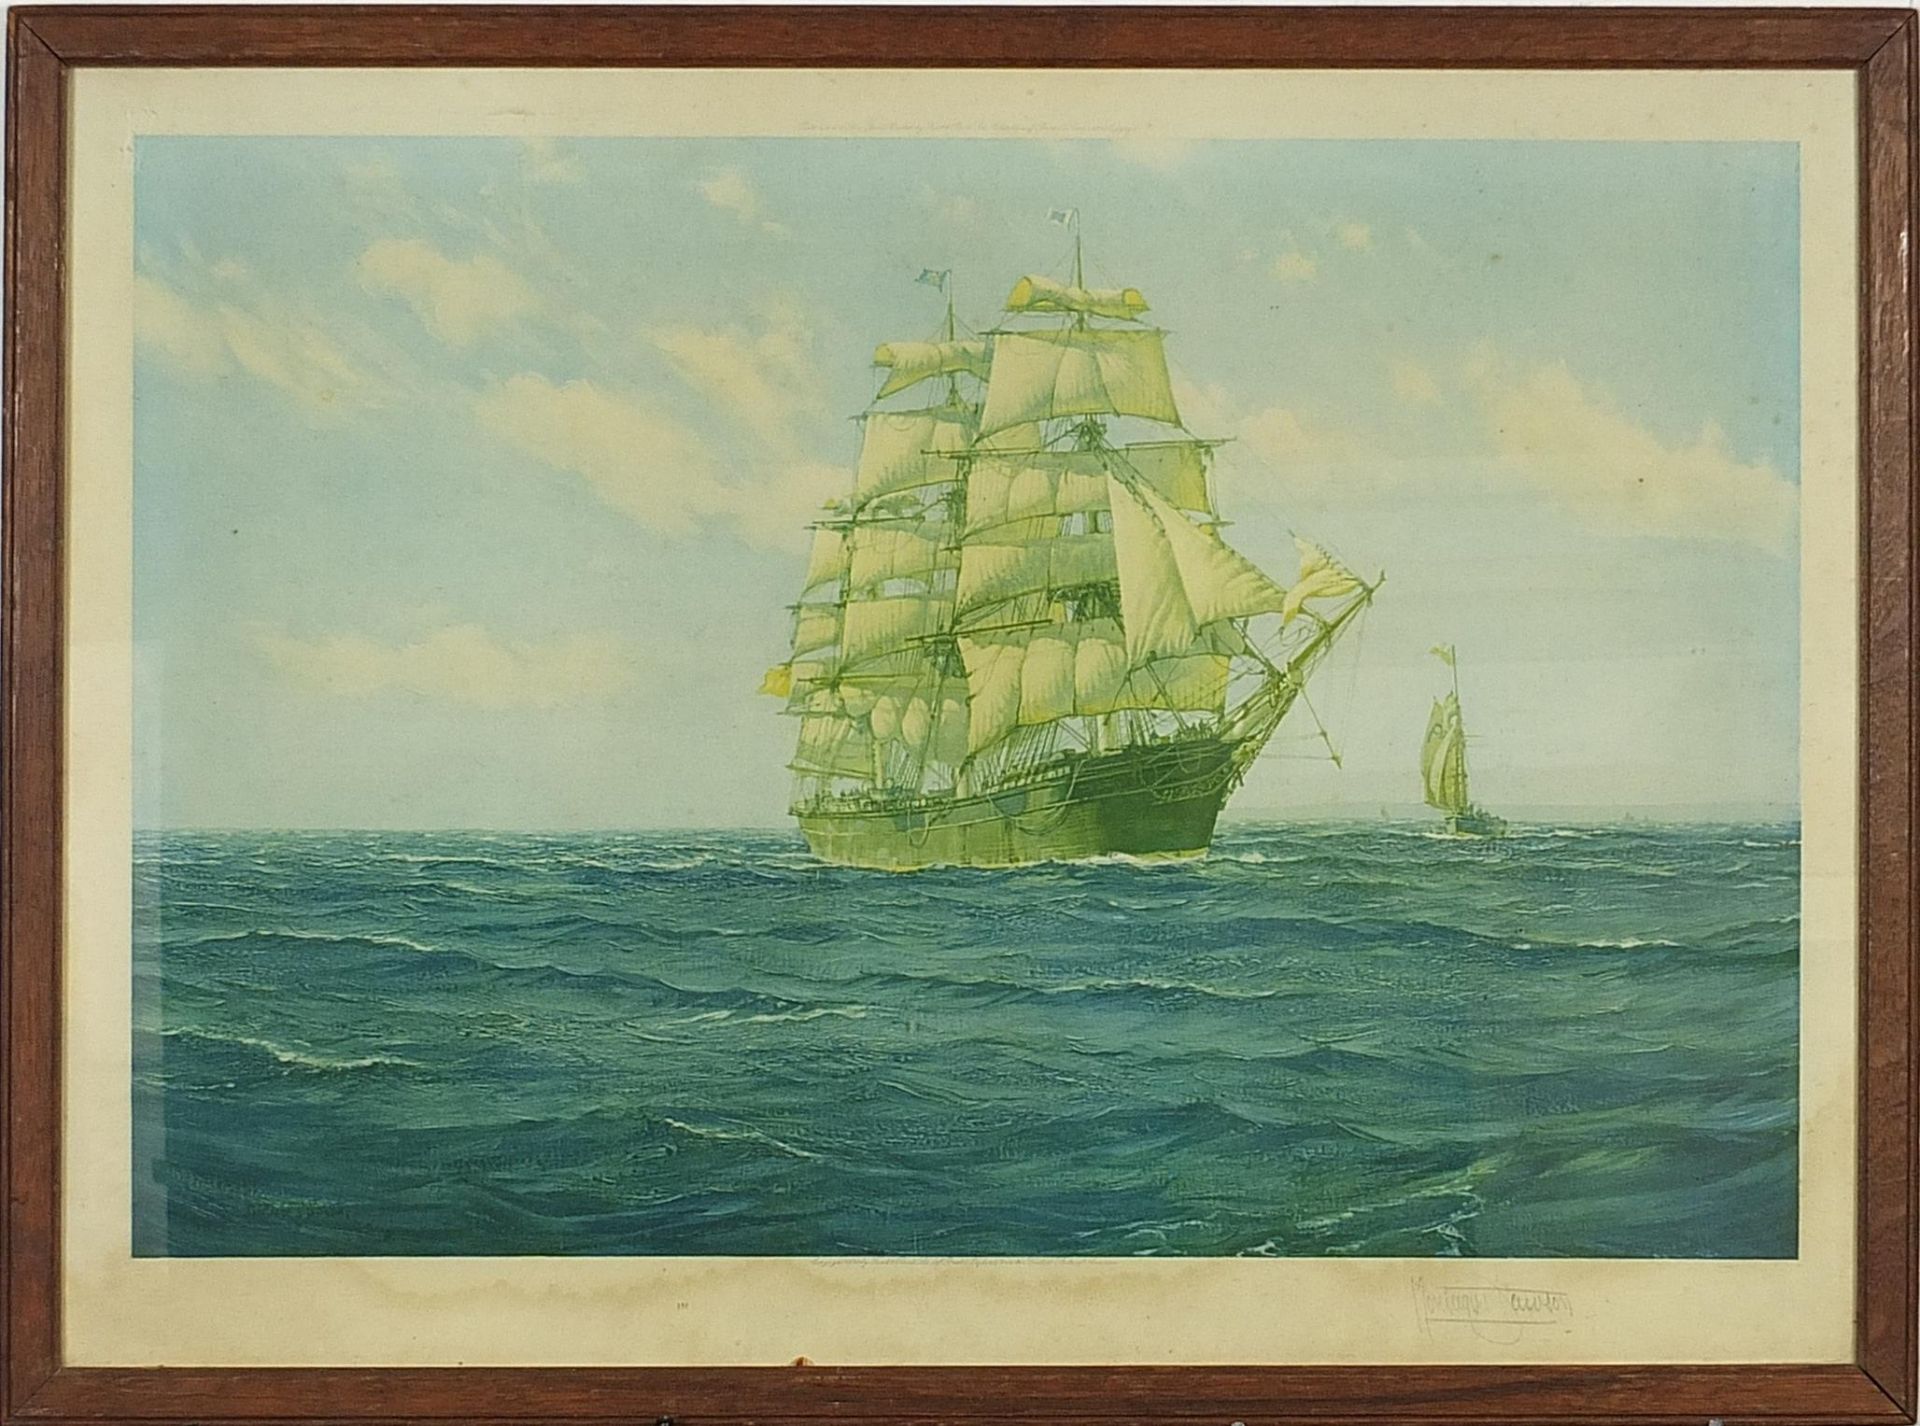 Montaque J Dawson - Tallship and boat on water, vintage pencil signed print in colour with Fine - Image 2 of 4